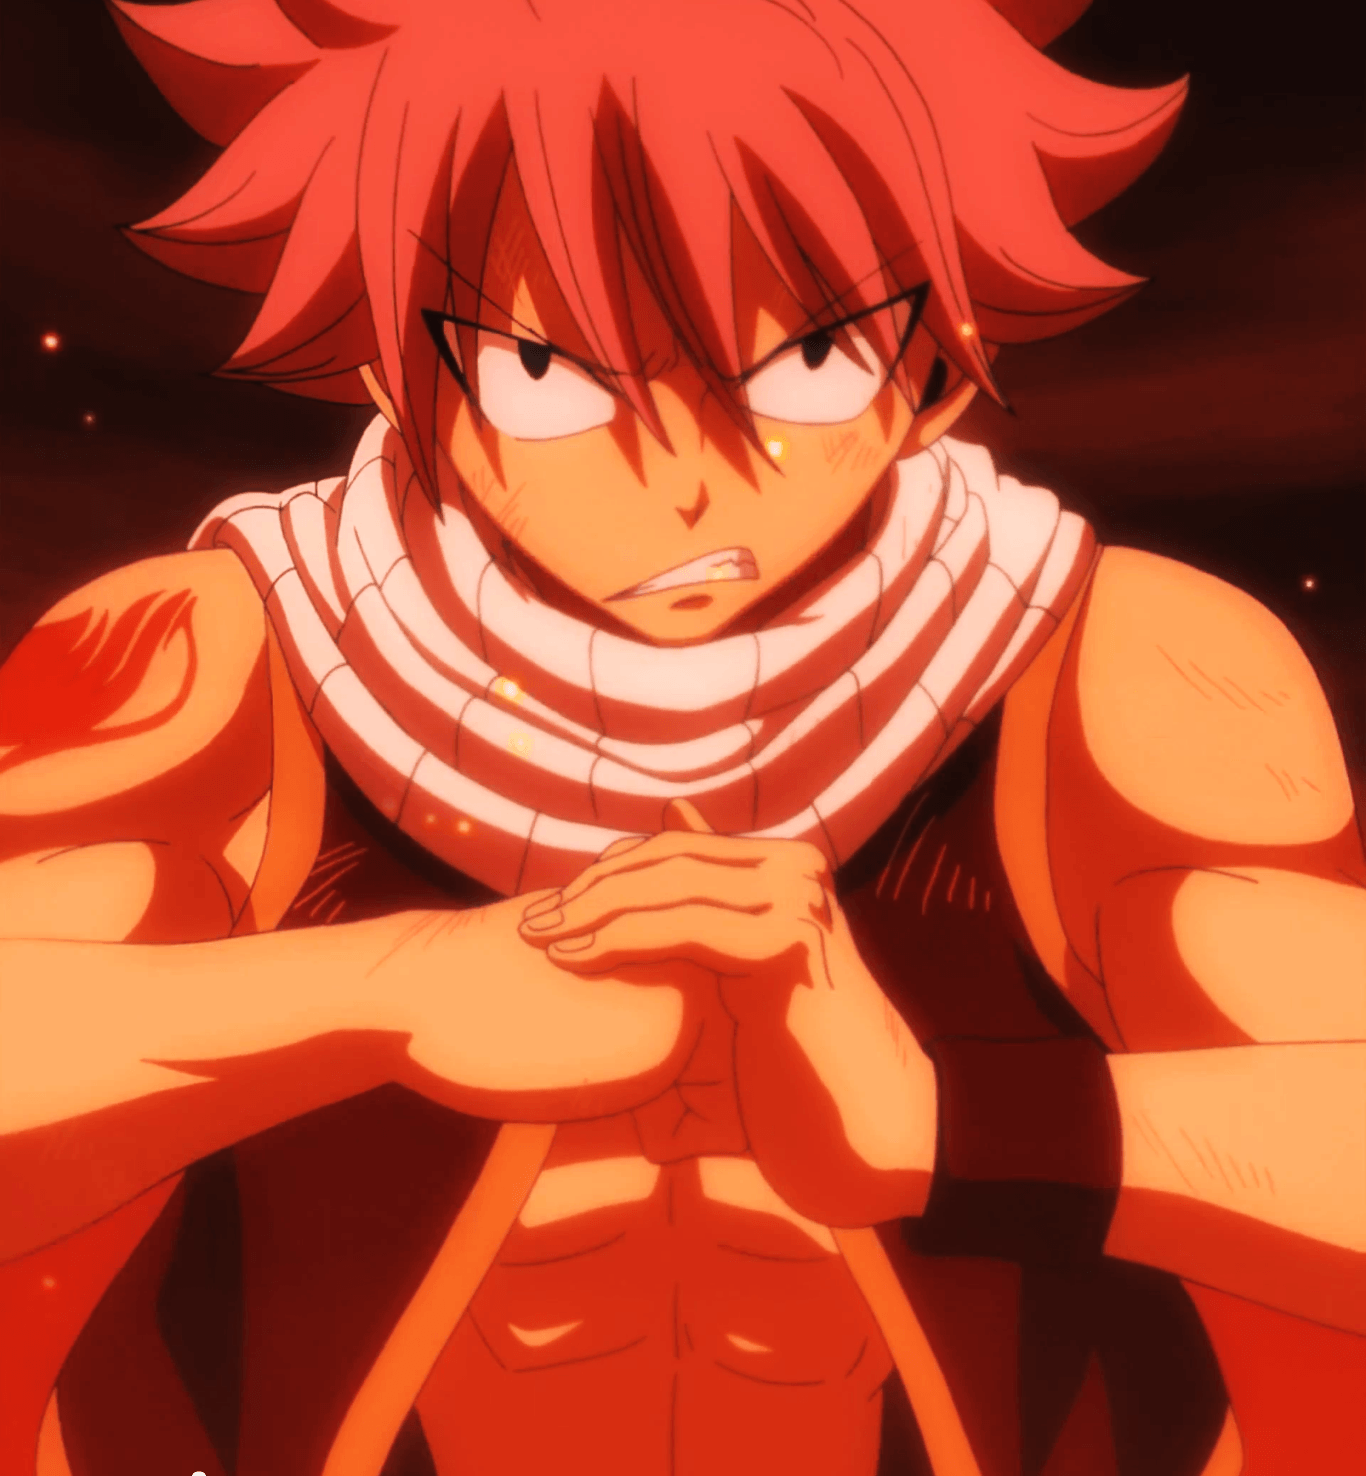 fairy tail episode 176 lucy